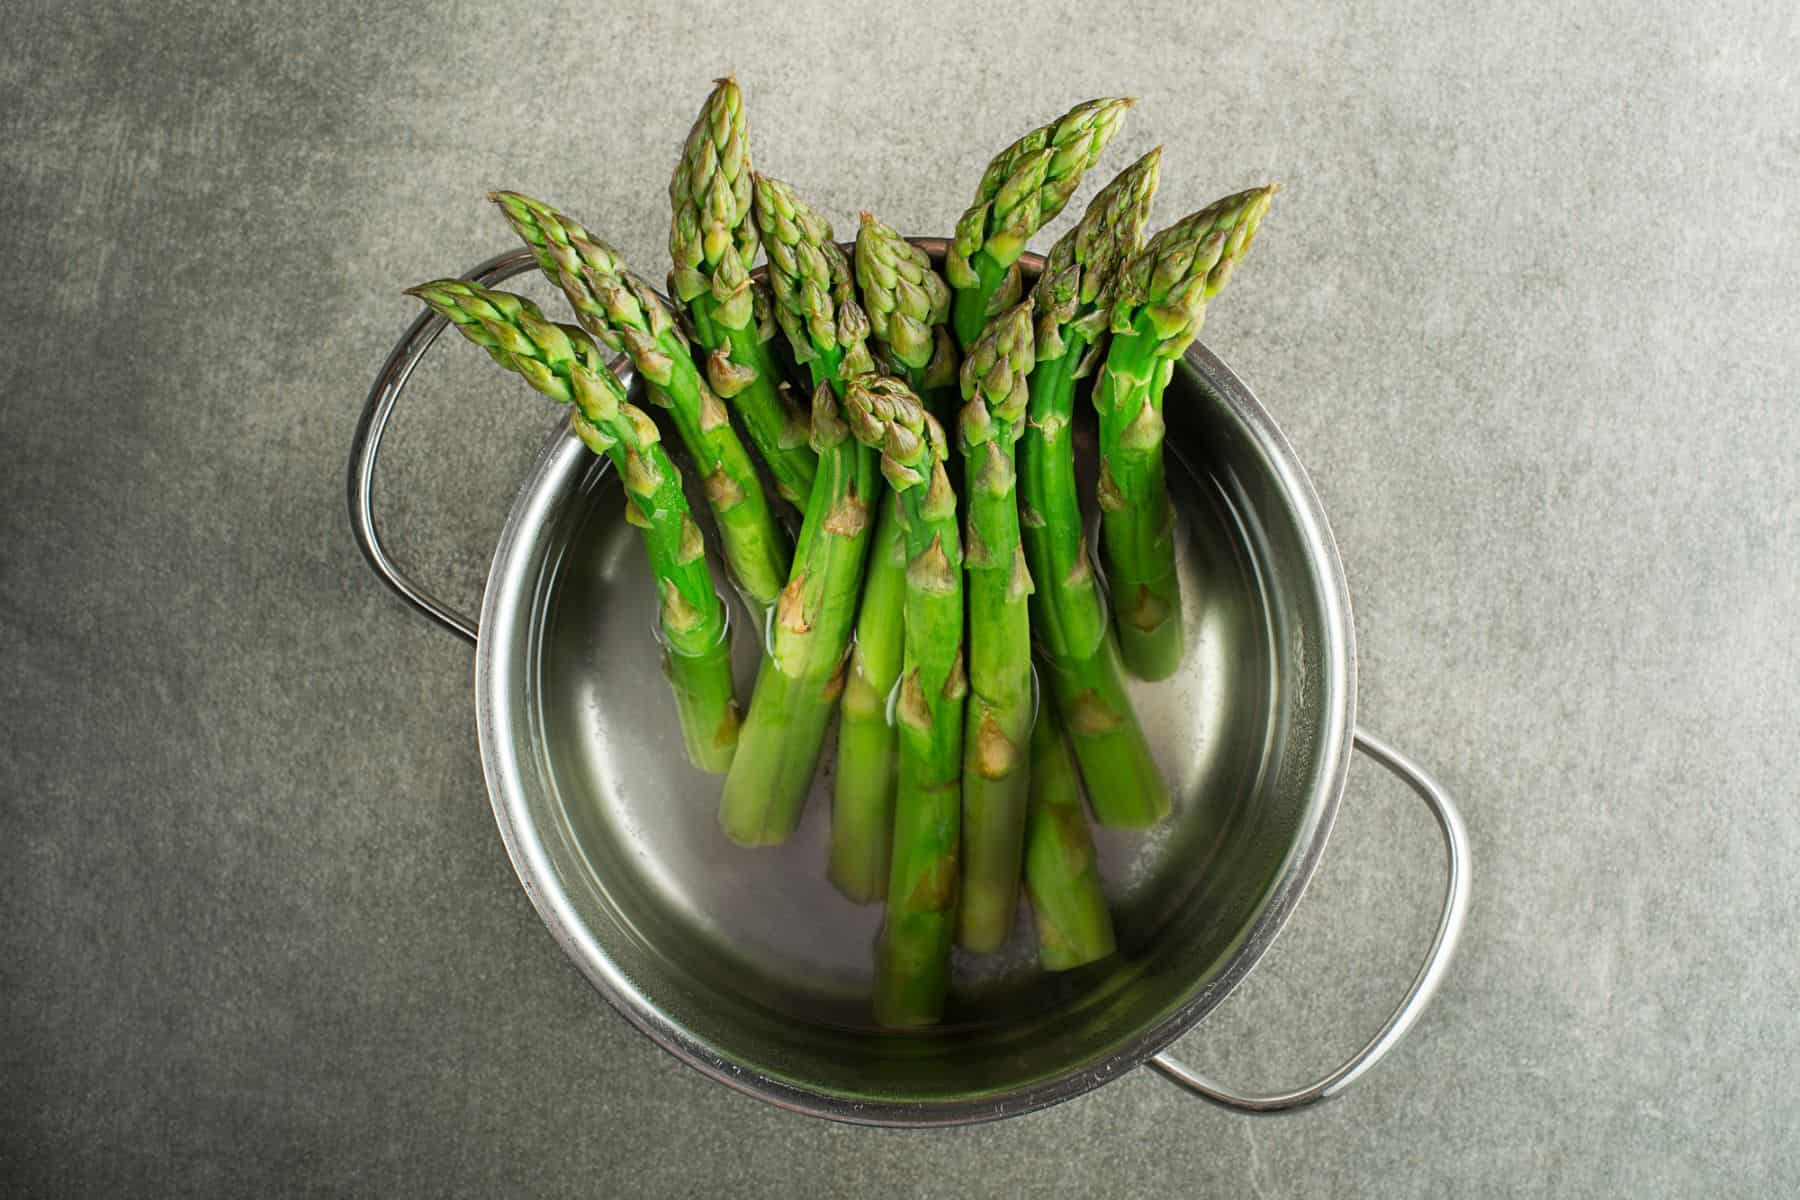 Discover how to cook asparagus like a pro with a bunch of fresh spears standing upright in a metal colander.